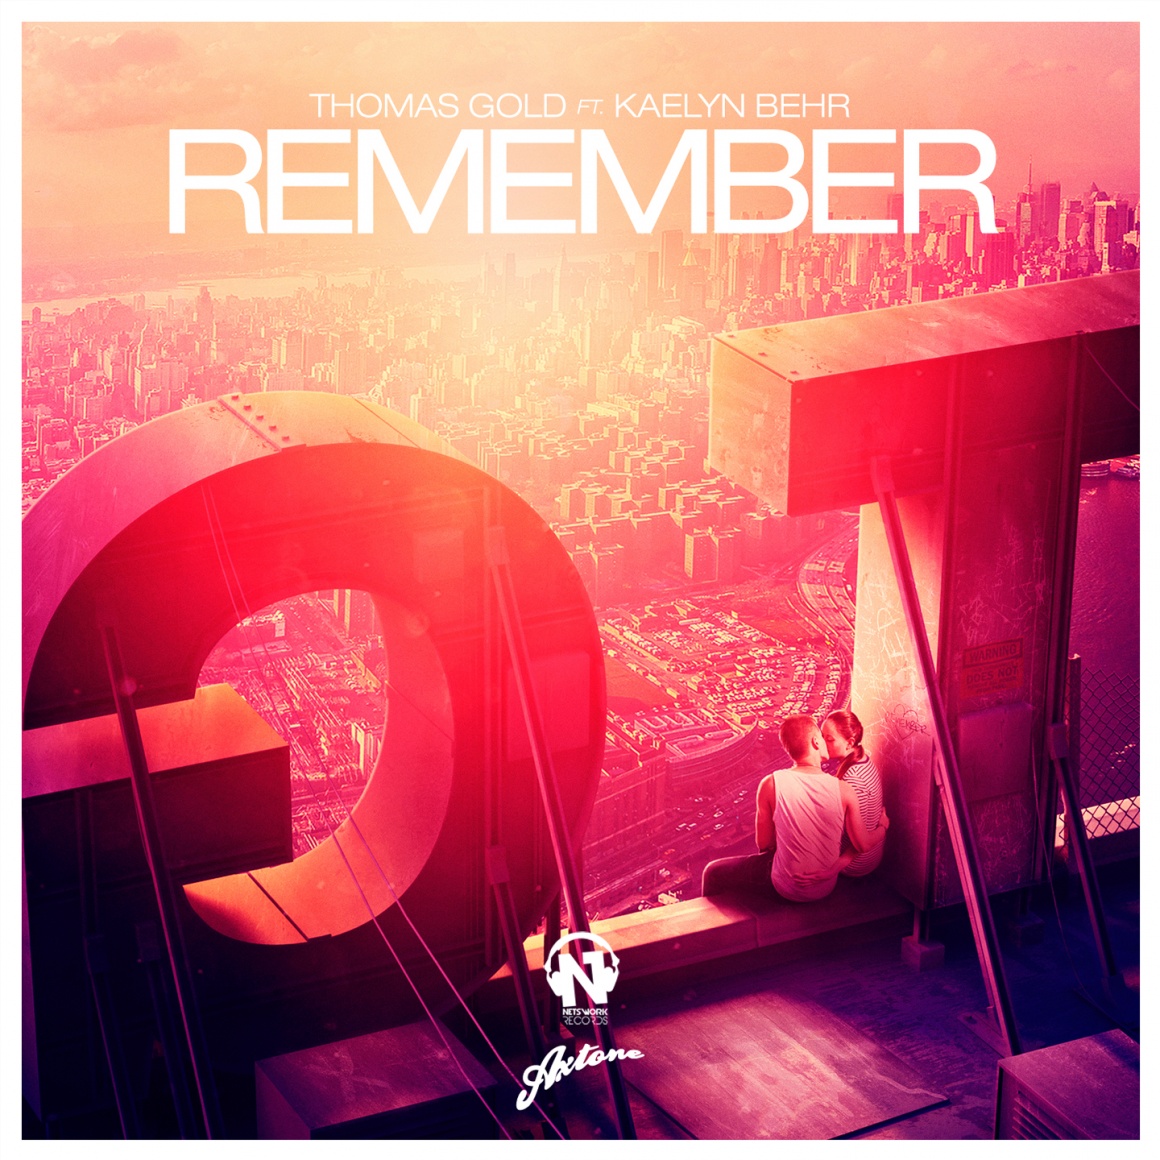 THOMAS GOLD Feat. KAELYN BEHR “Remember”